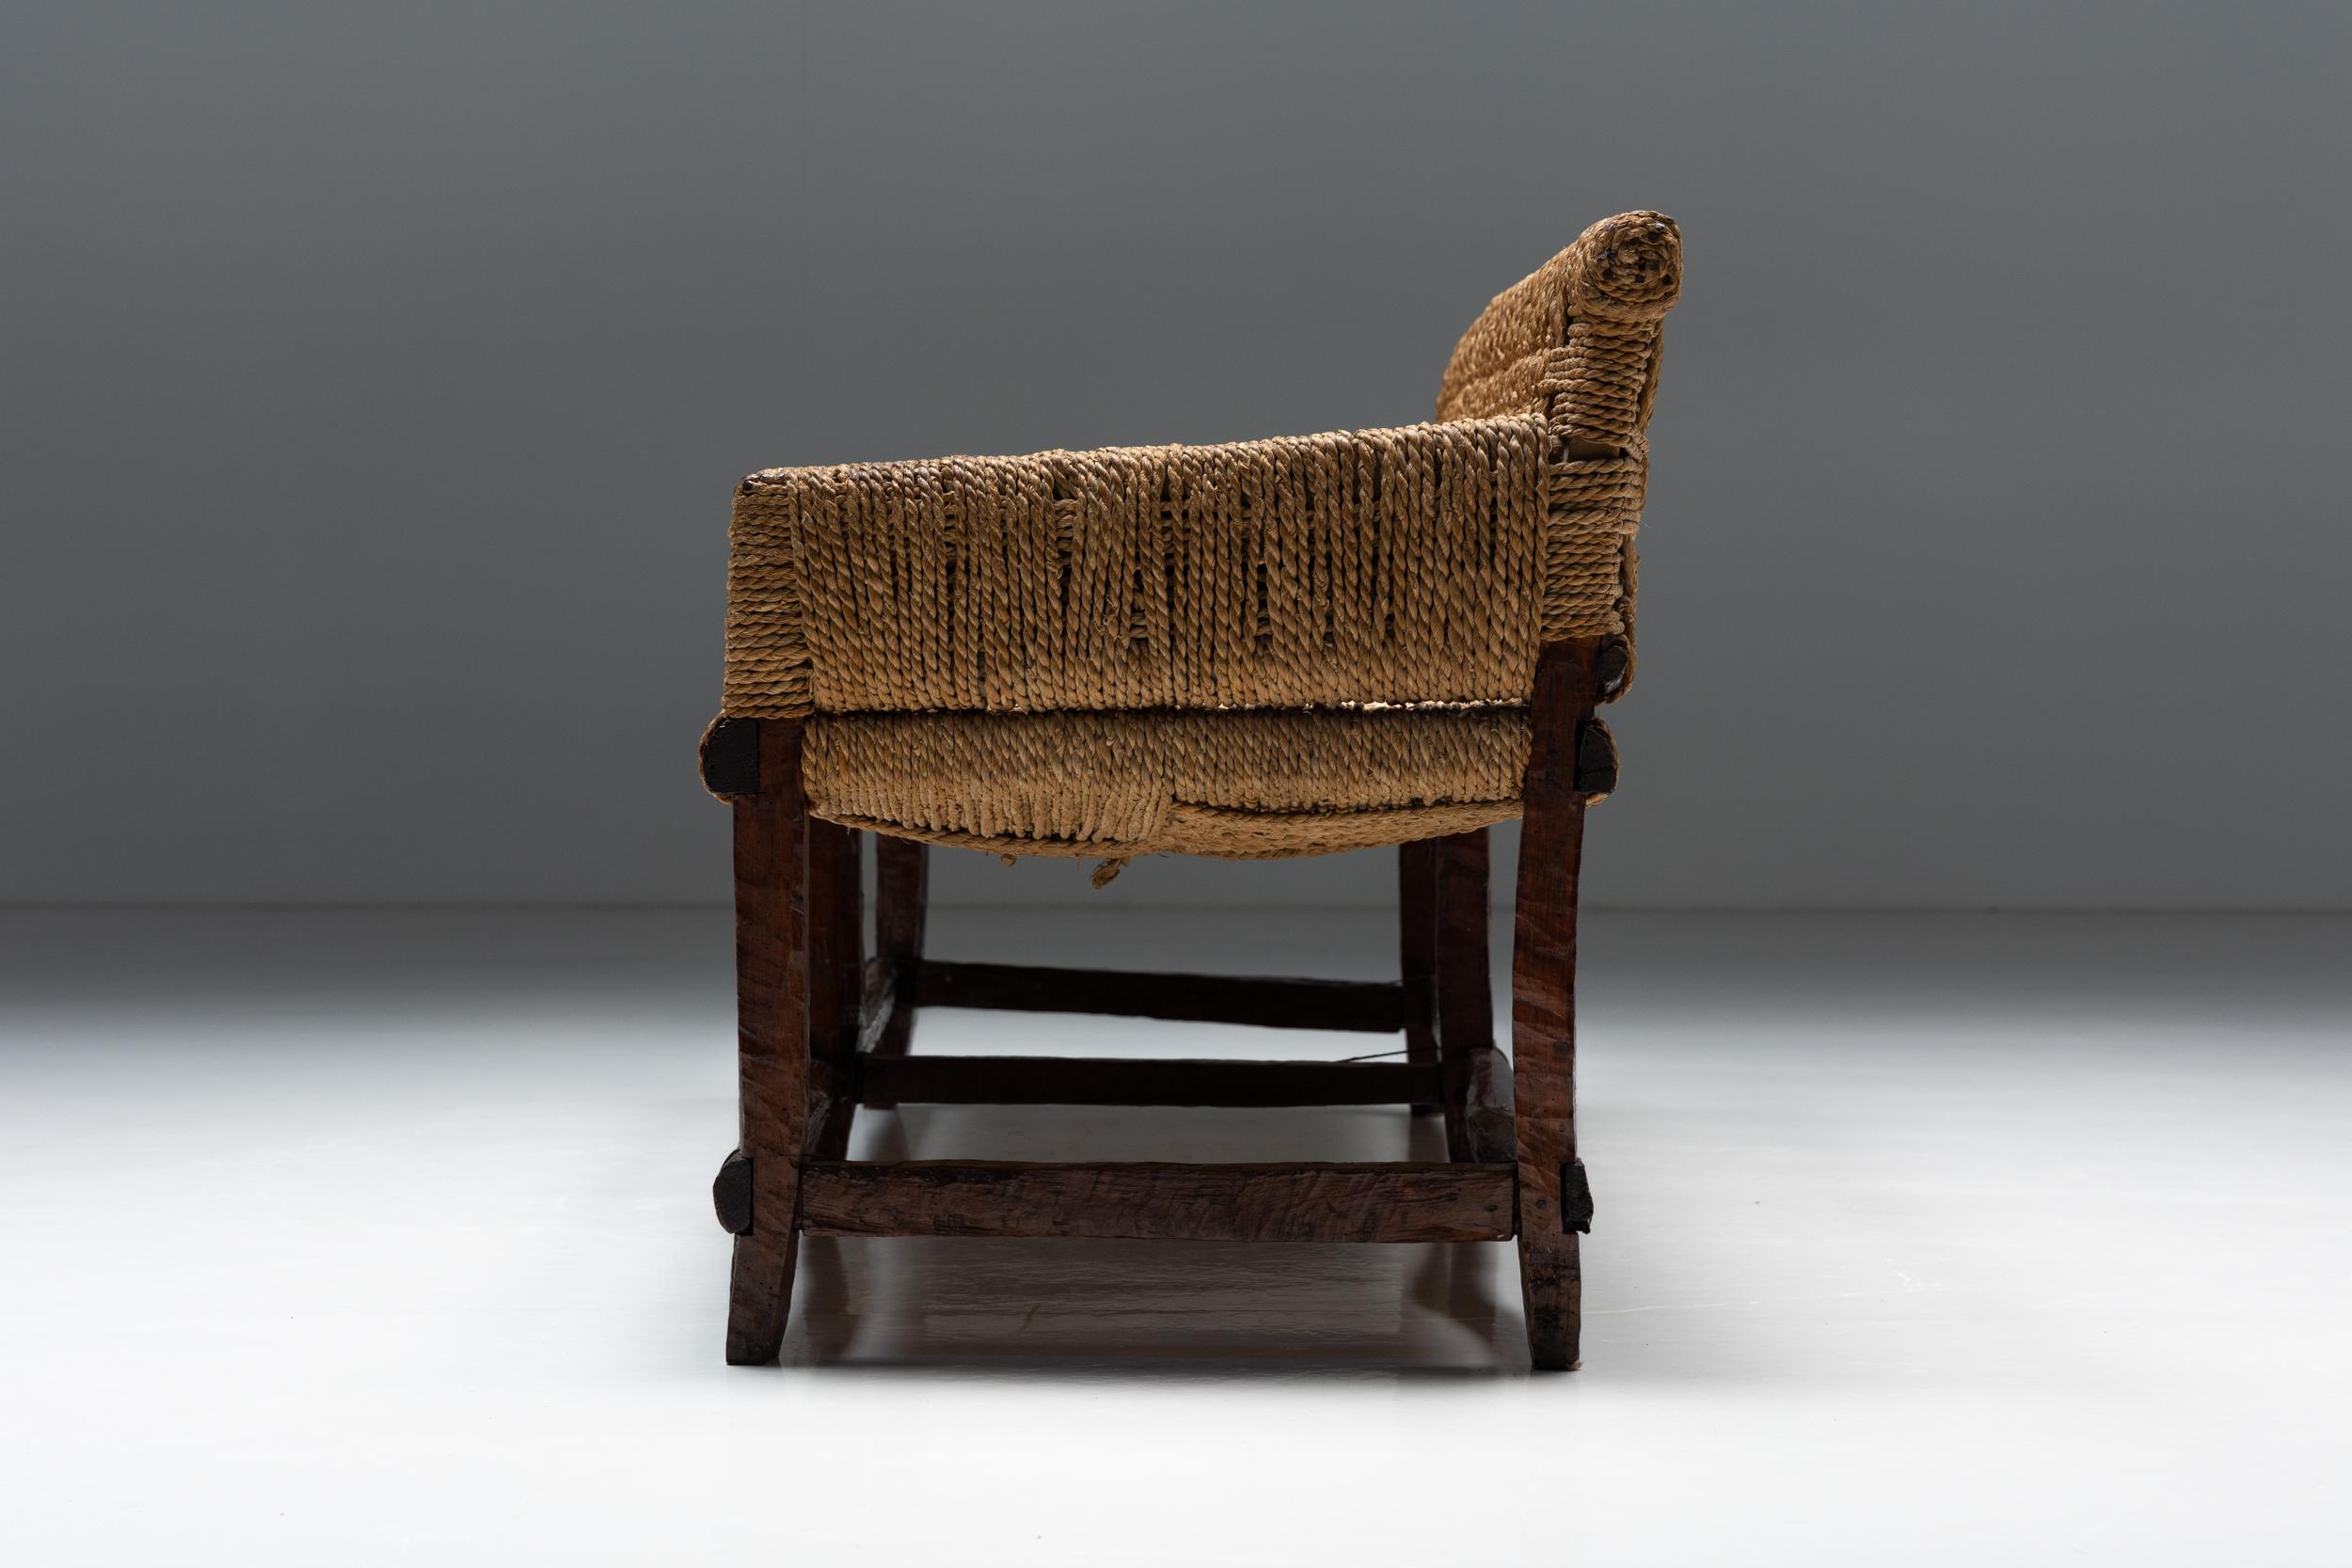 19th Century Naive Folk Art Bench with Woven Seating, 1920s